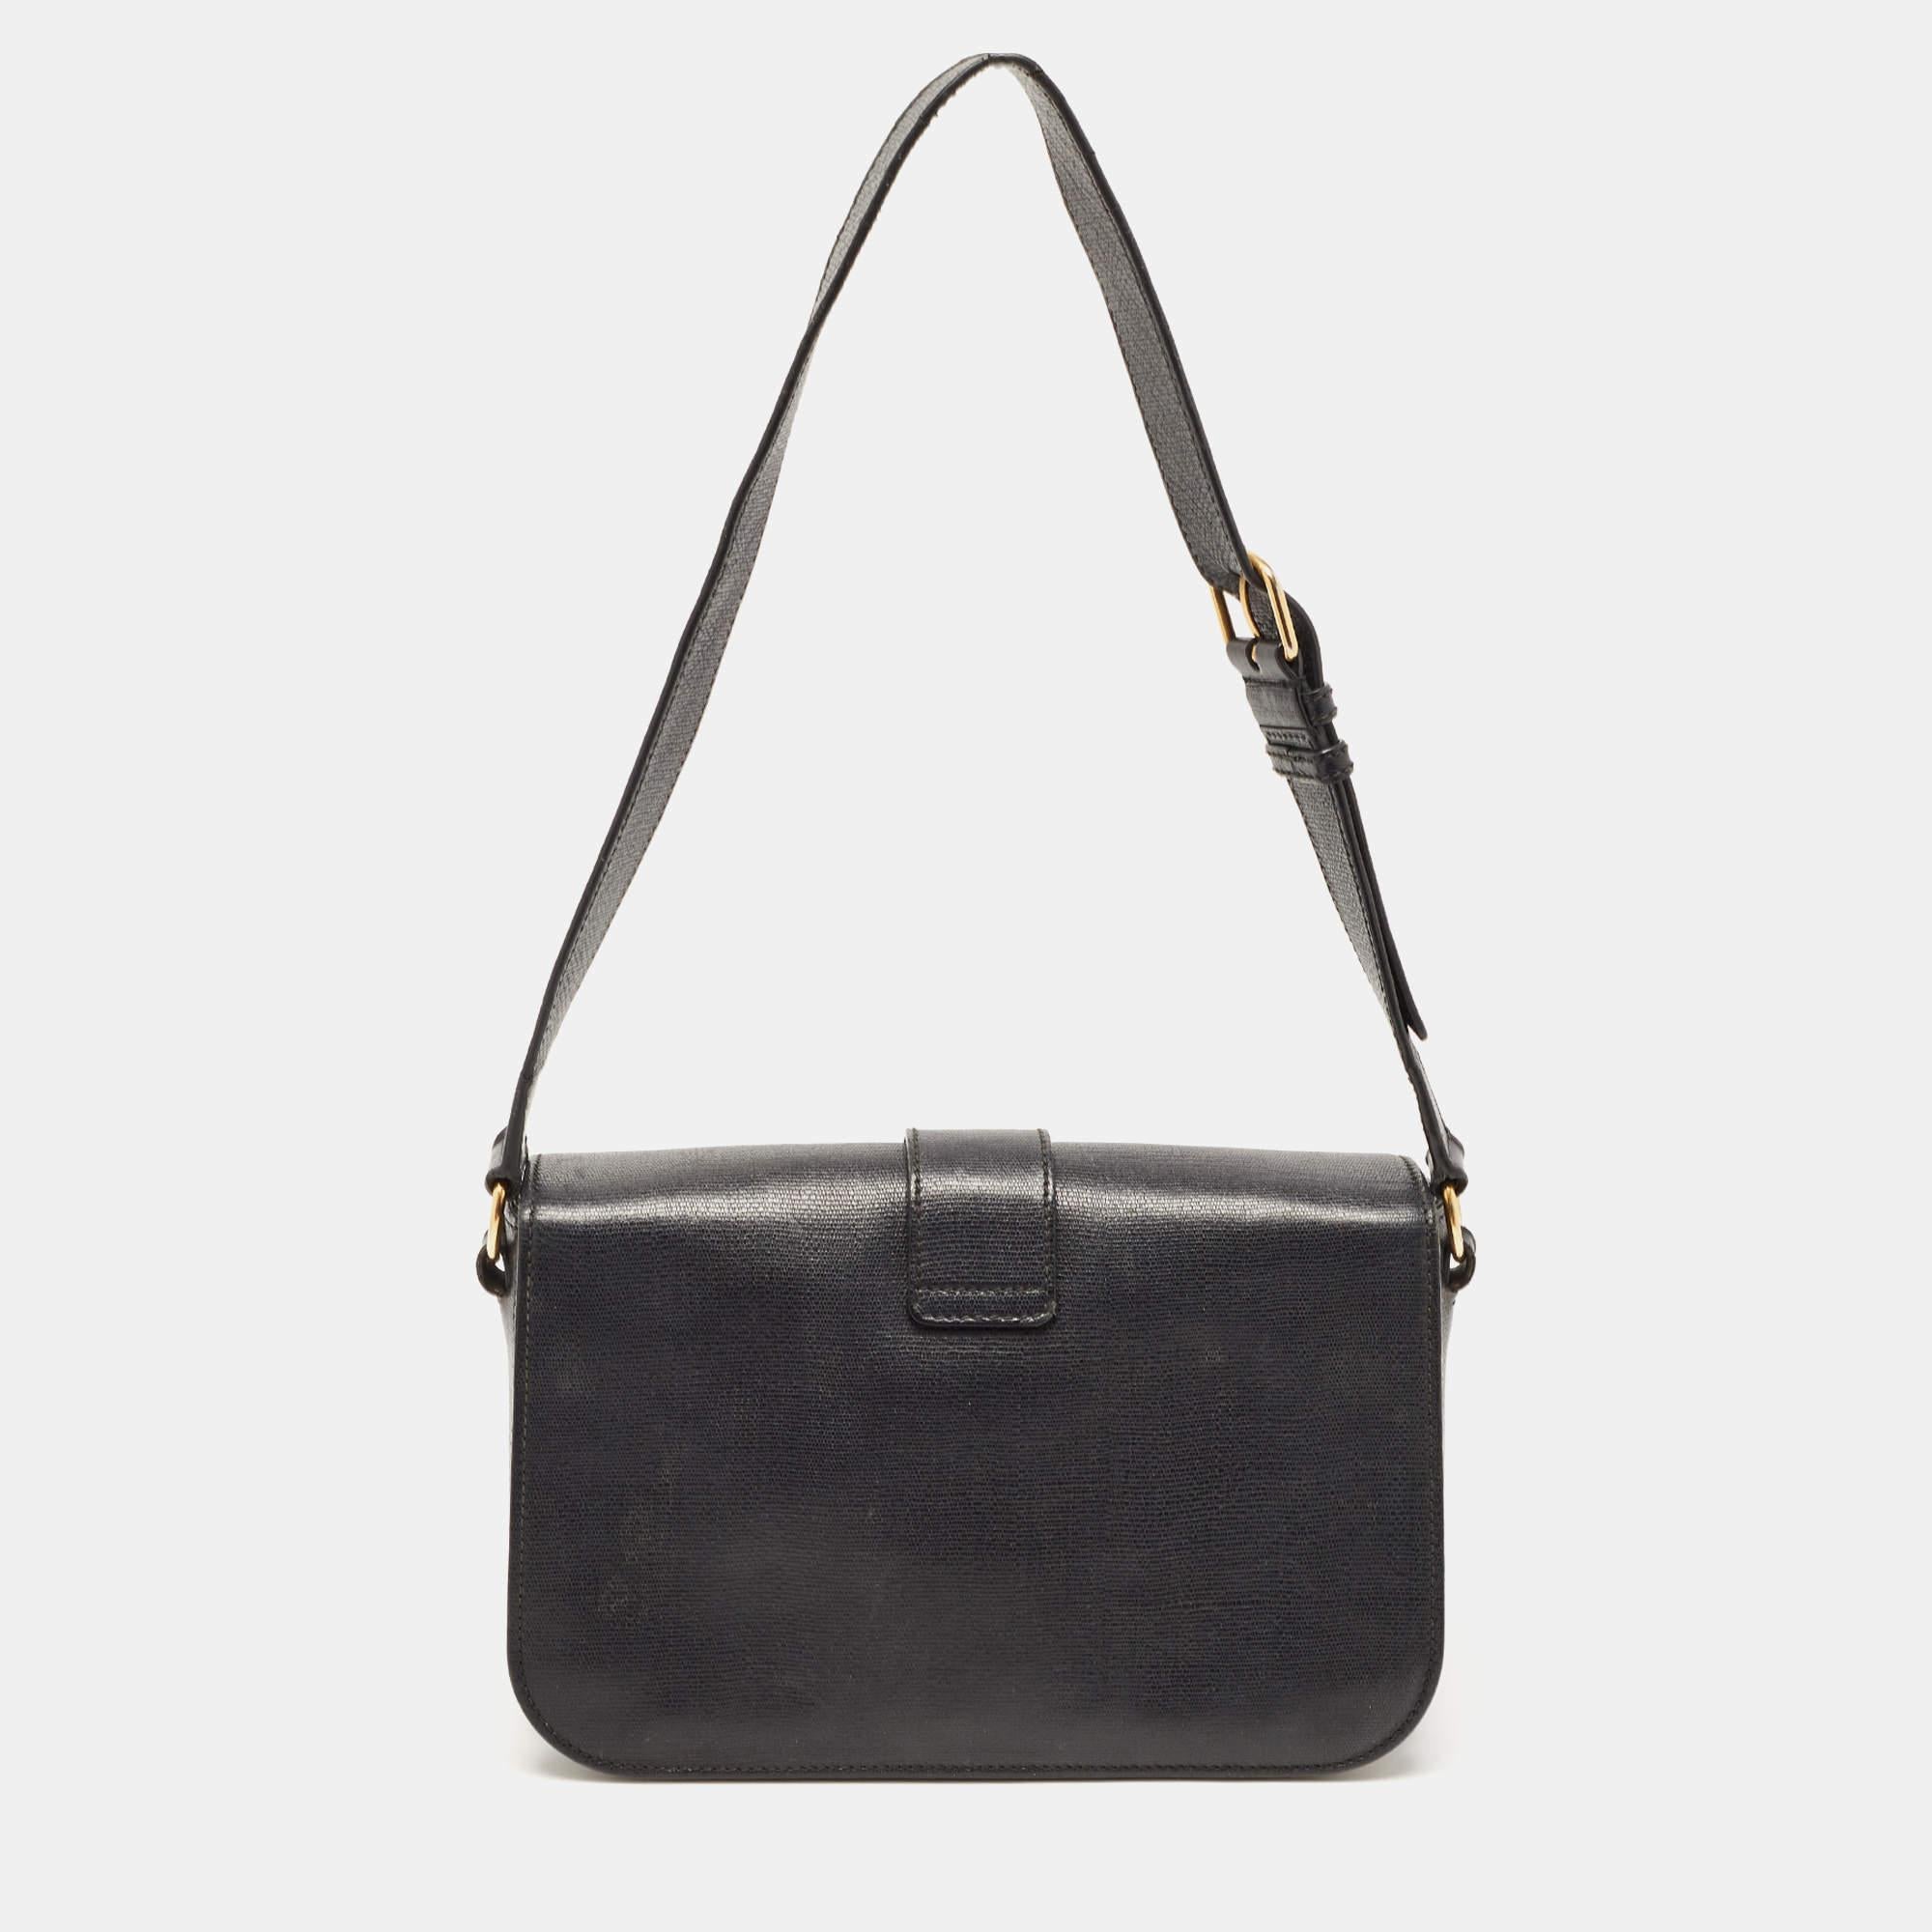 Fall in love with this absolutely stylish Chyc flap bag from Yves Saint Laurent. It has been crafted meticulously in Italy and made from quality leather. It comes in a lovely shade of black that will complement a host of outfits effortlessly. It is